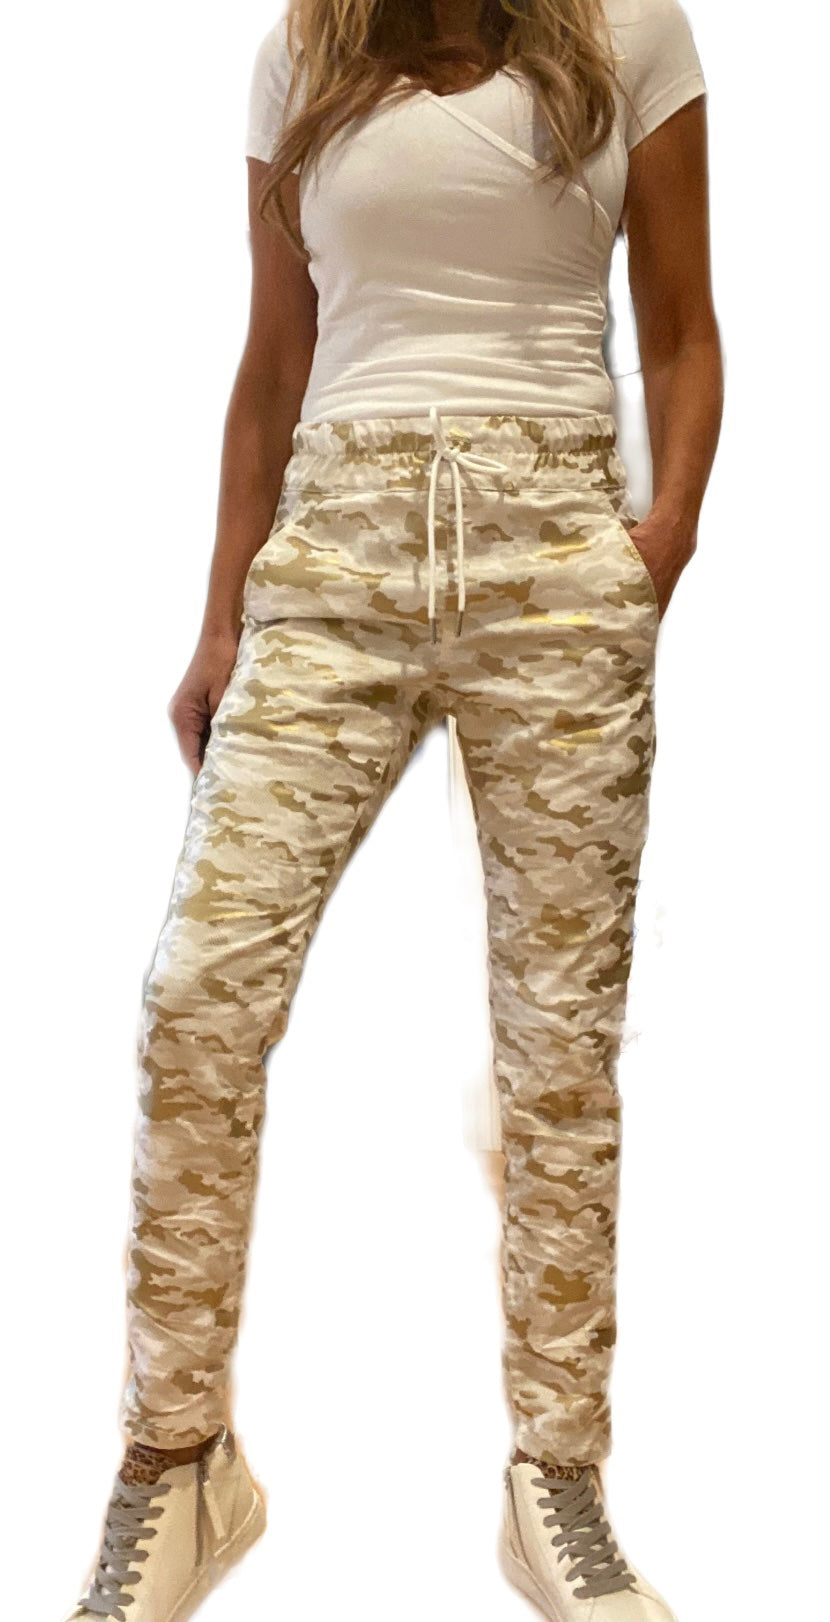 SHELY-WHITE/GOLD CAMO - Kingfisher Road - Online Boutique